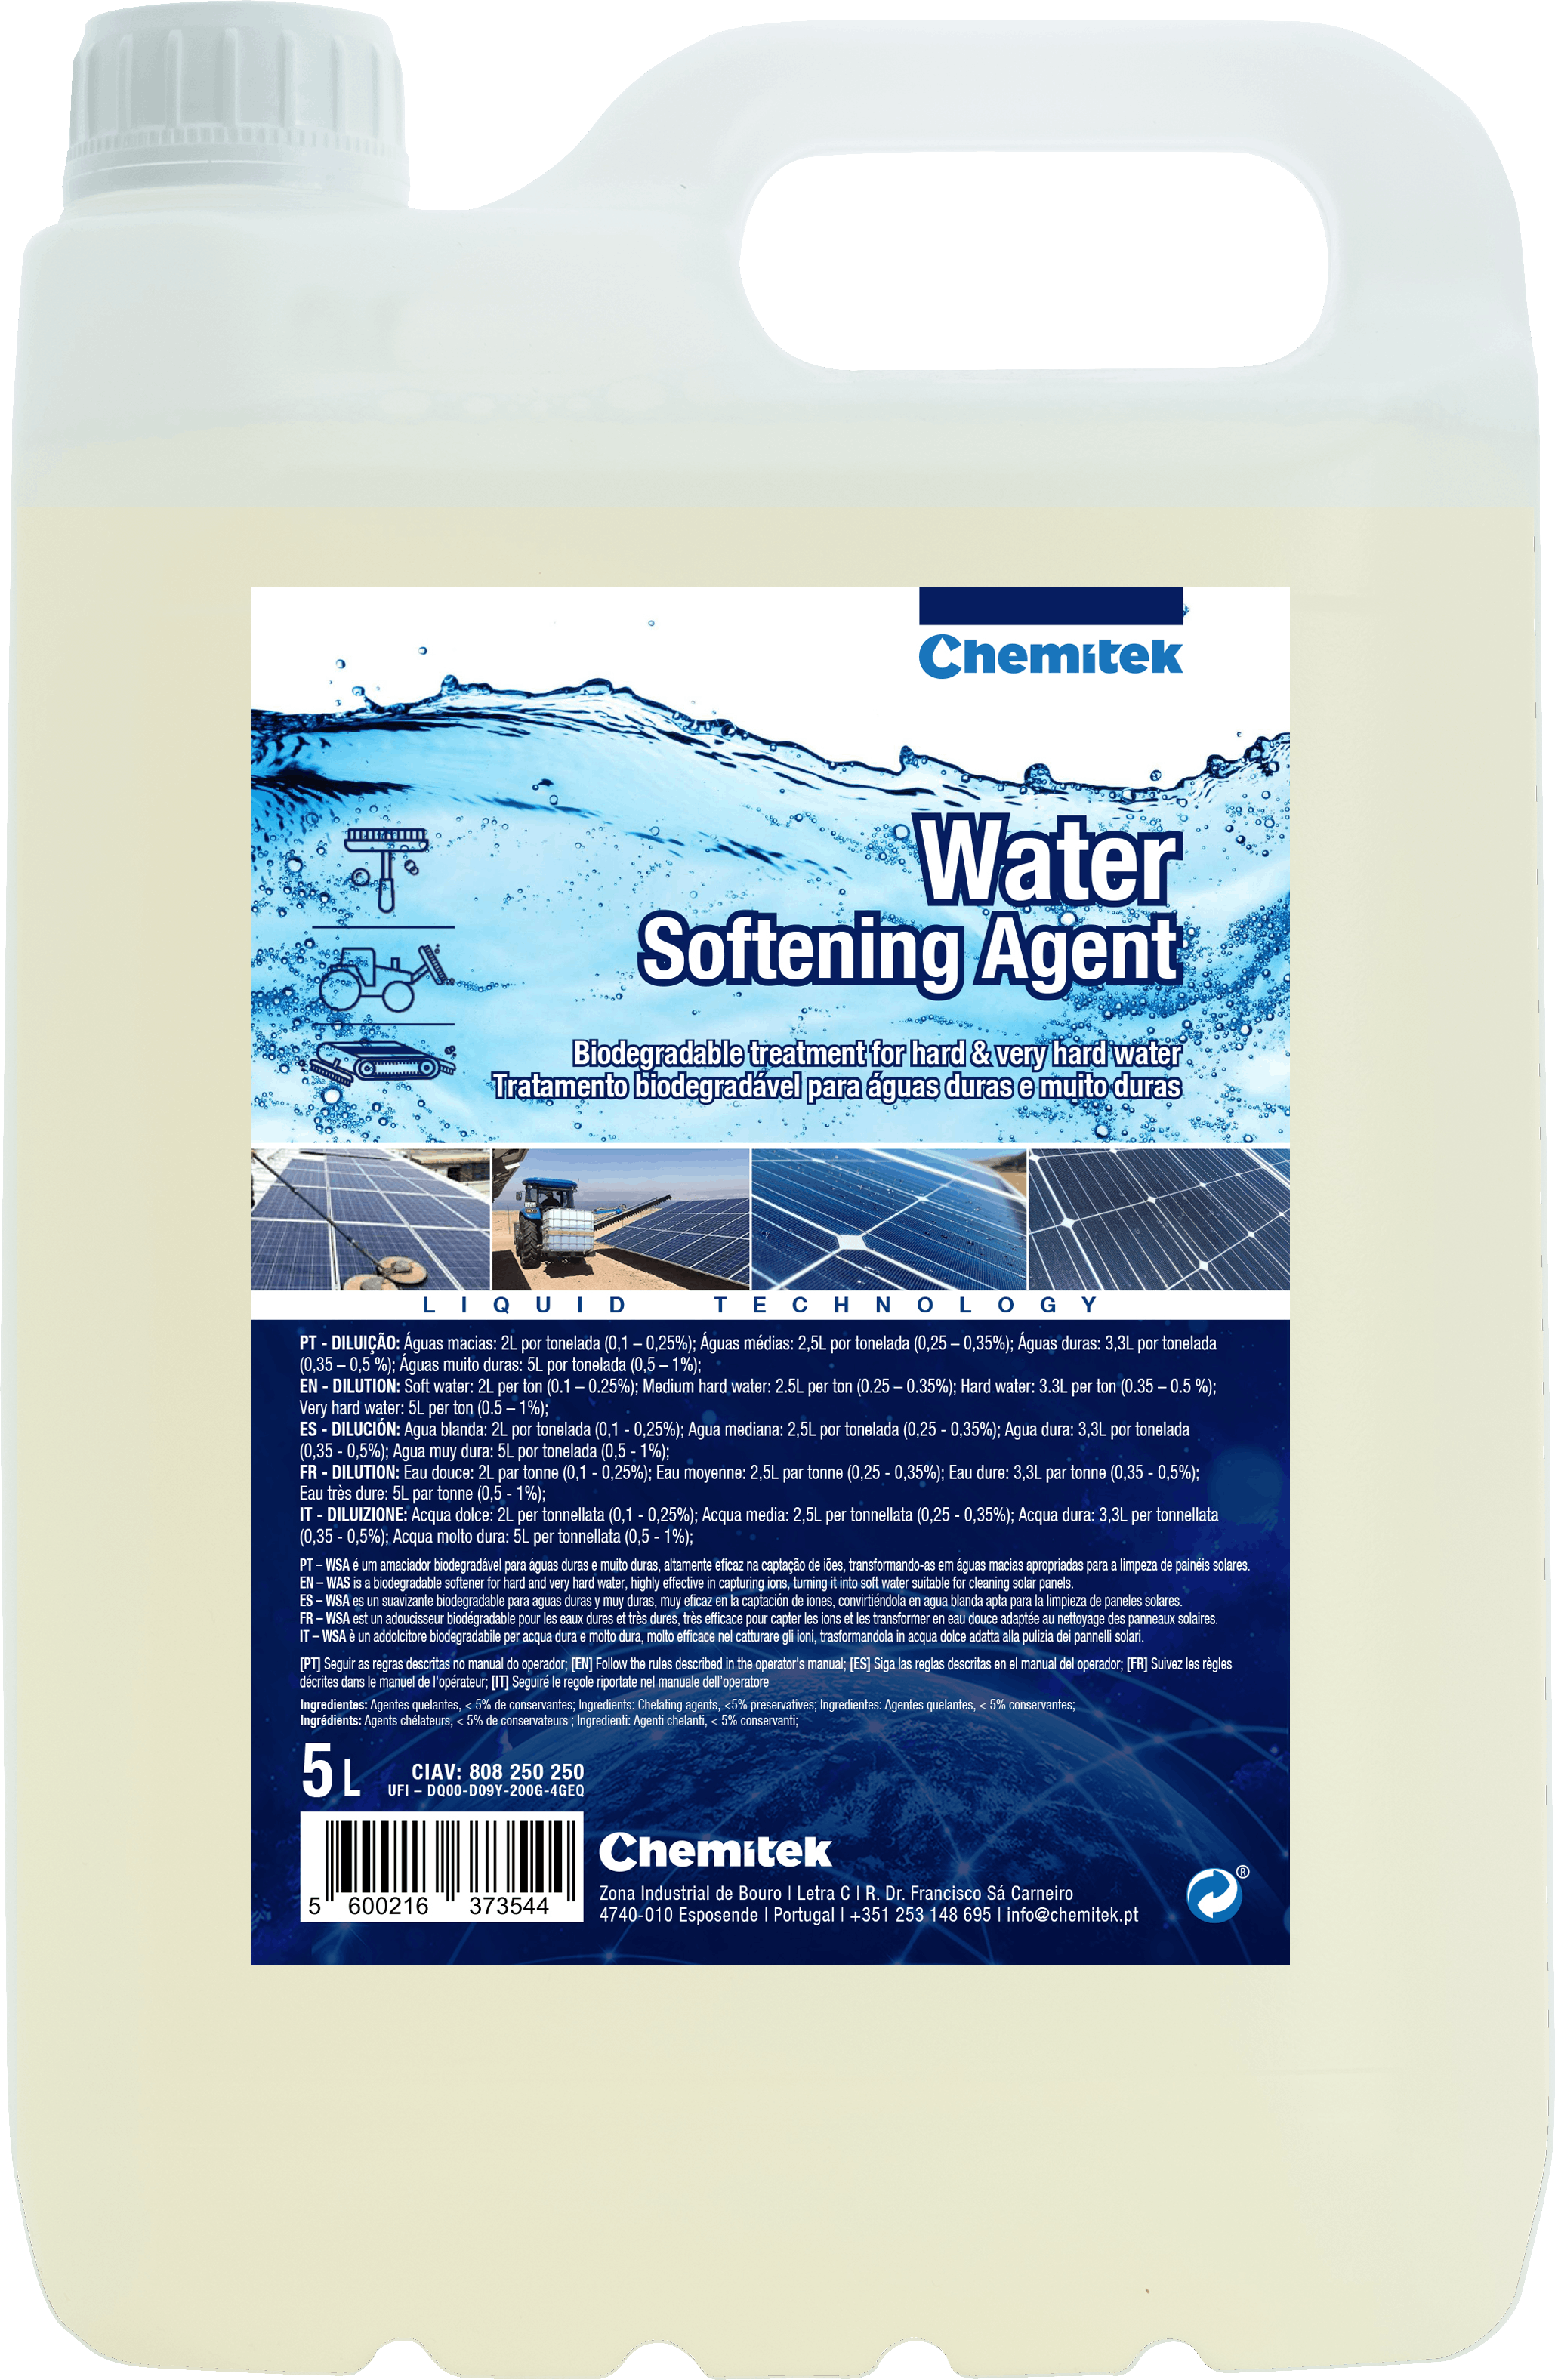 image - Water Softening Agent - Treatment for hard water to properly clean solar panels